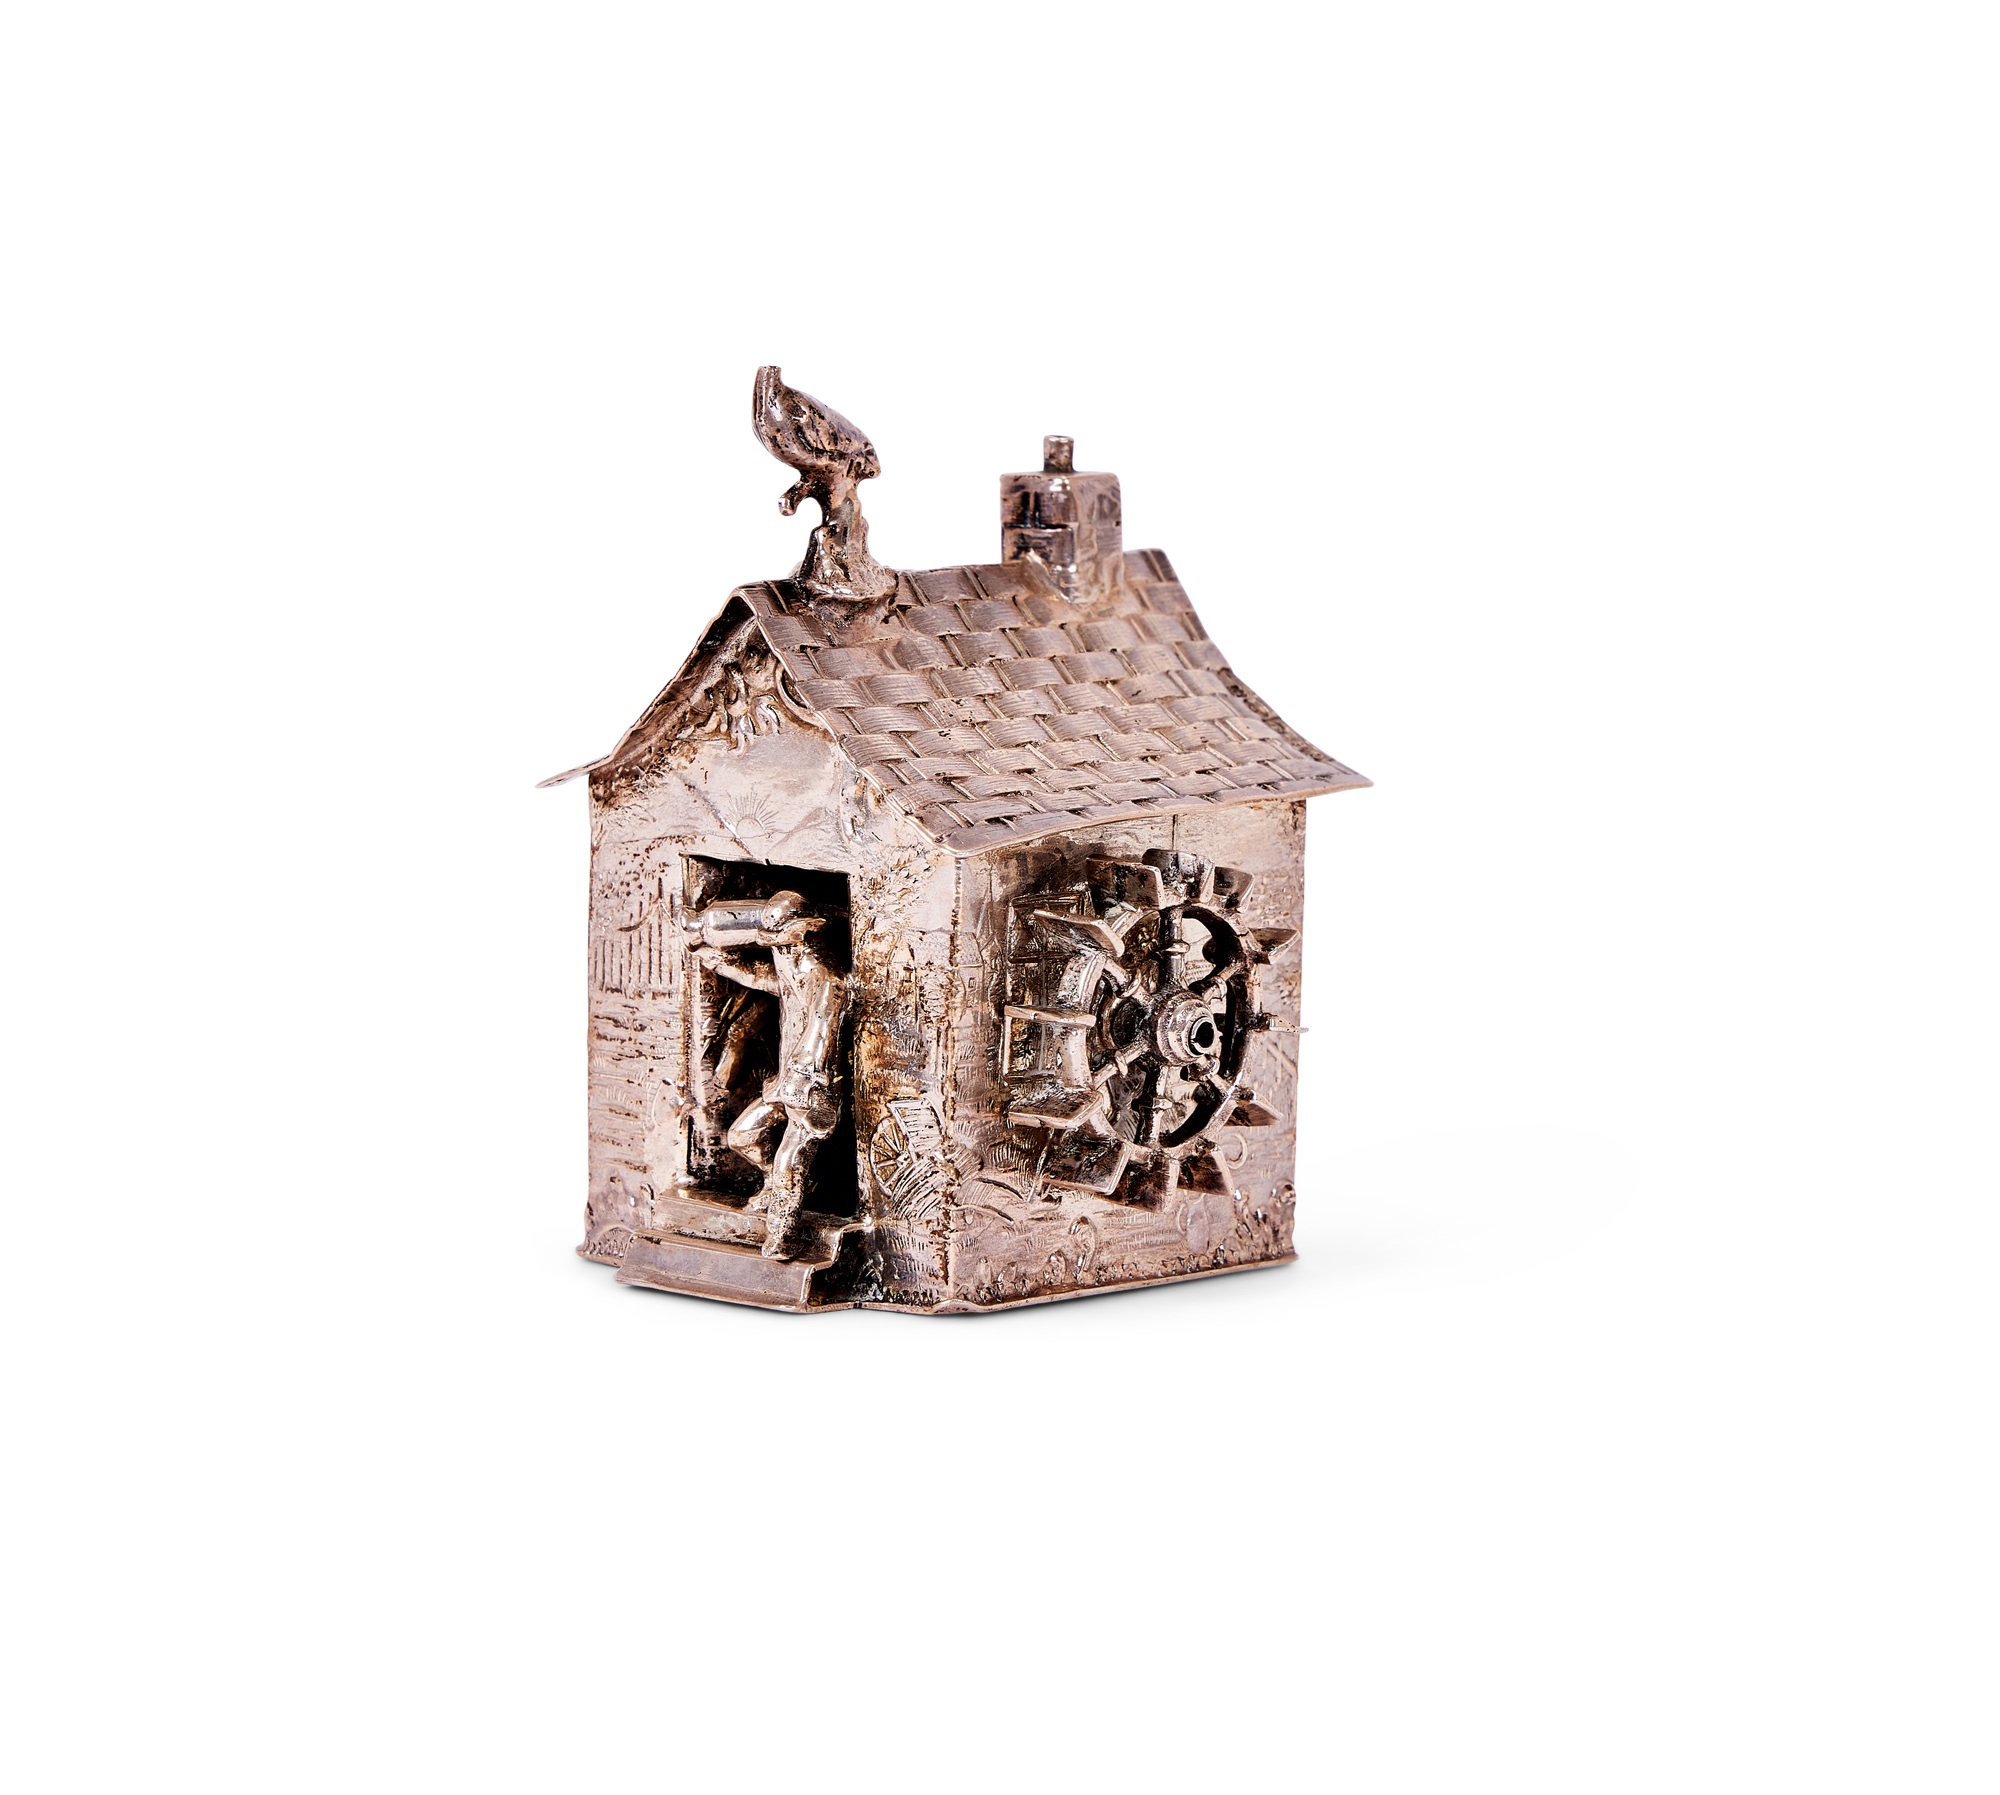 A 19TH CENTURY DUTCH SILVER MINIATURE MODEL OF A WATERMILL DEPICTING THE FOUR SEASONS